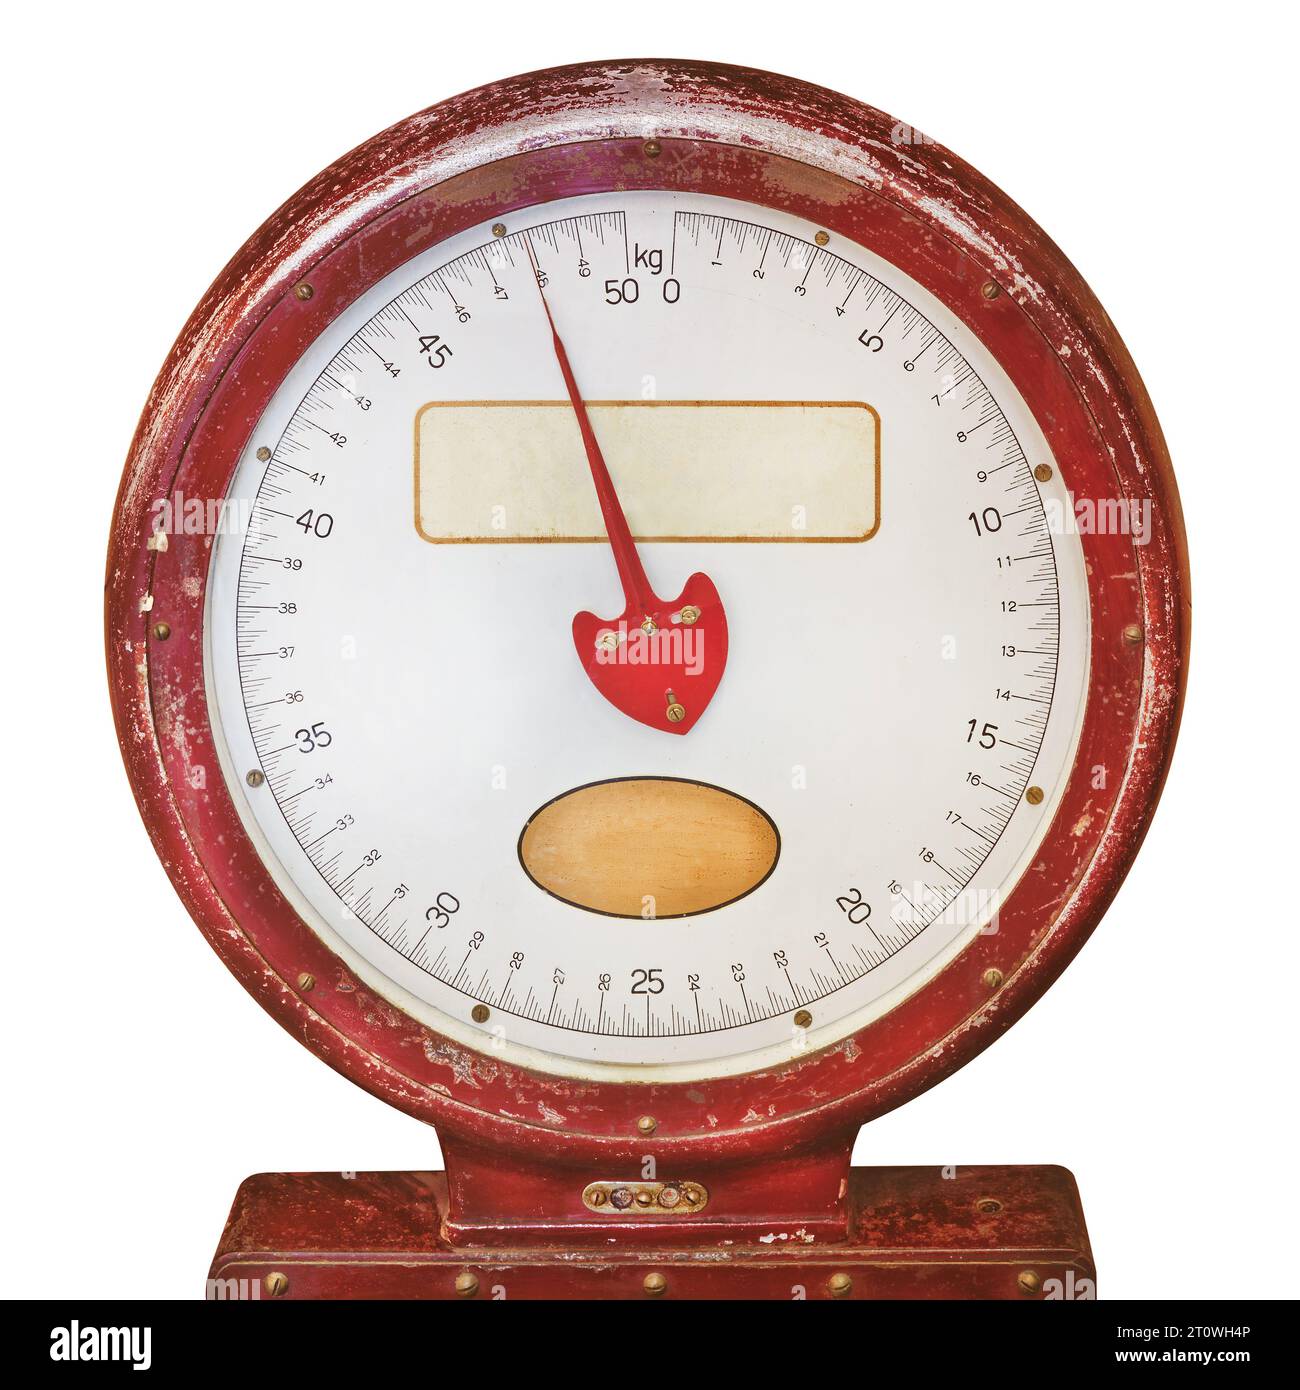 https://c8.alamy.com/comp/2T0WH4P/vintage-red-grocery-weight-scale-isolated-on-a-white-background-2T0WH4P.jpg